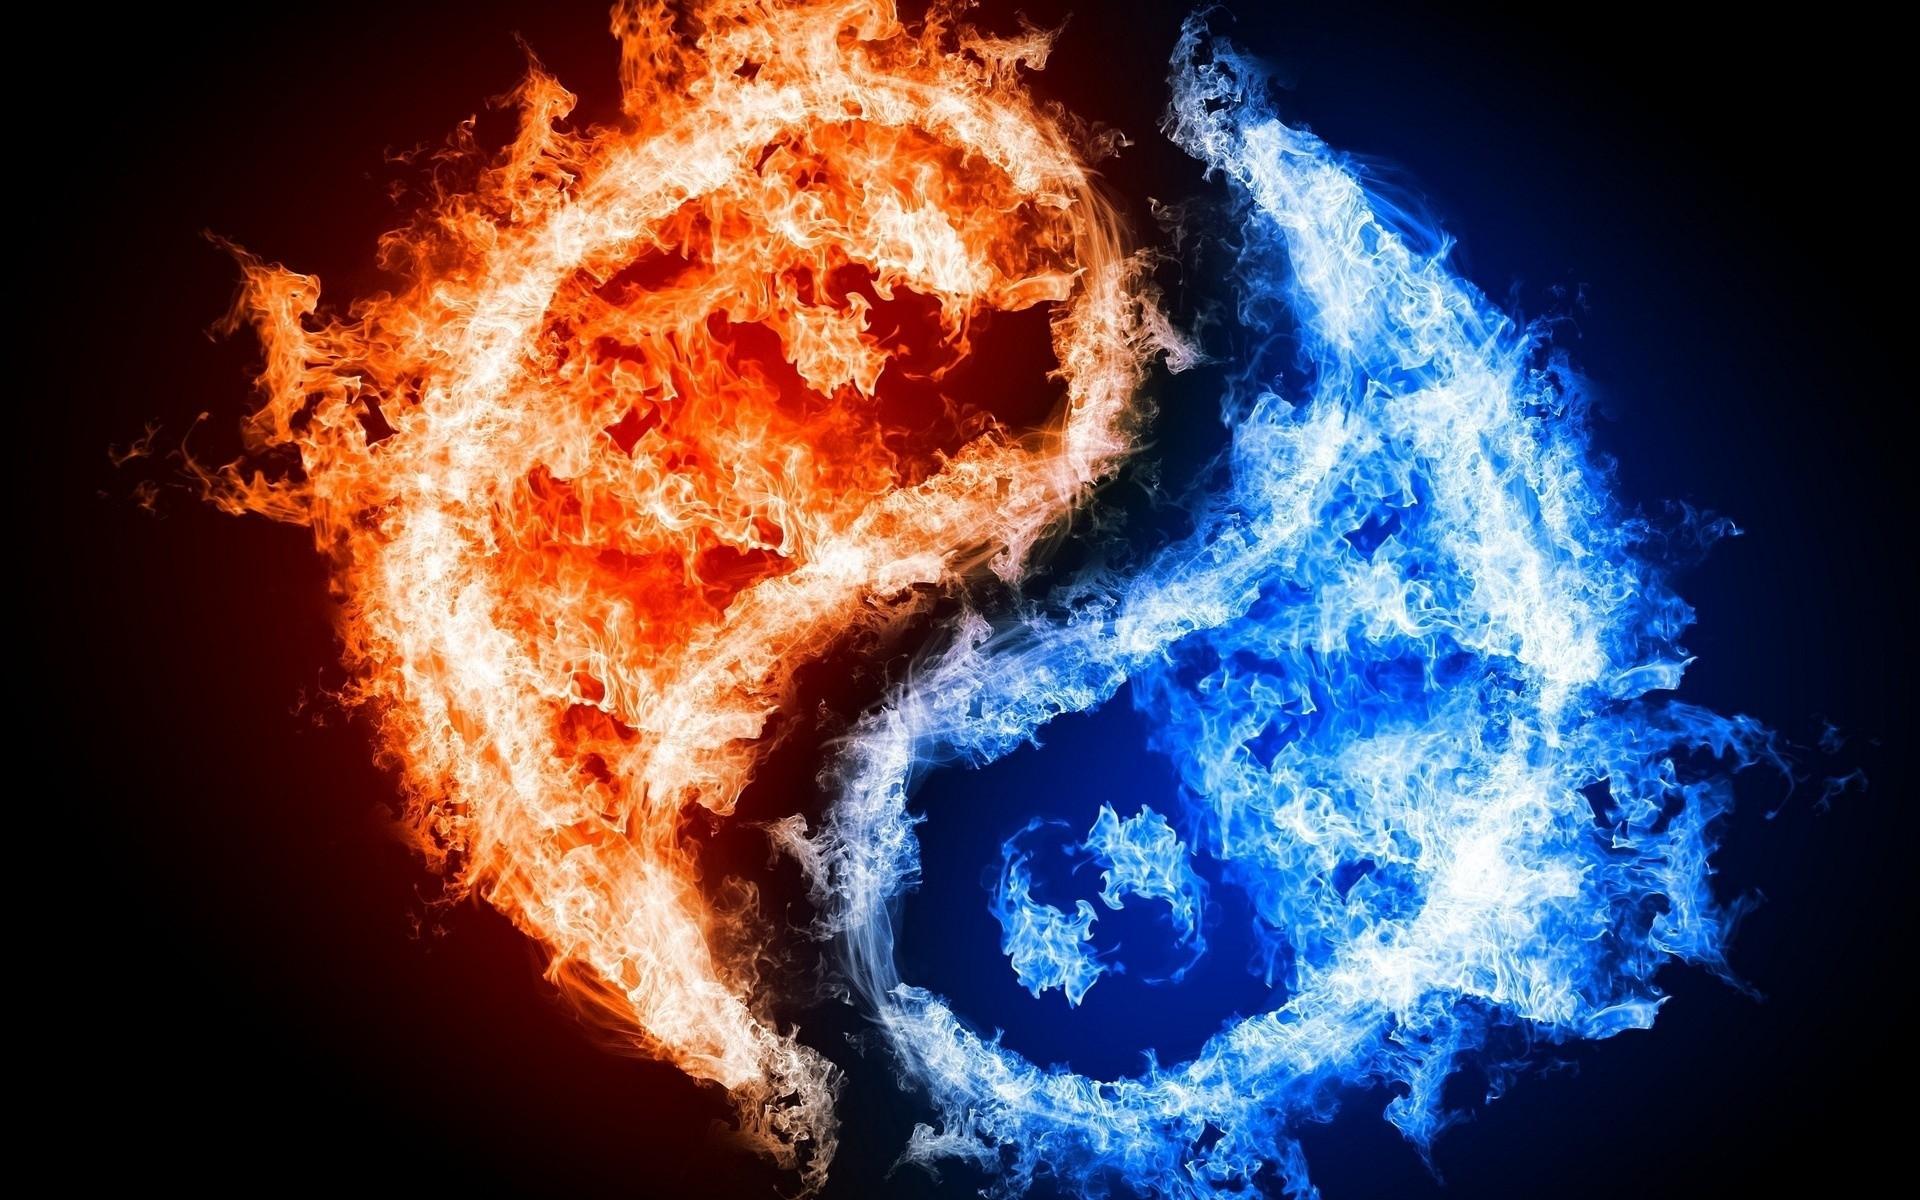 fire and ice dragon wallpapers